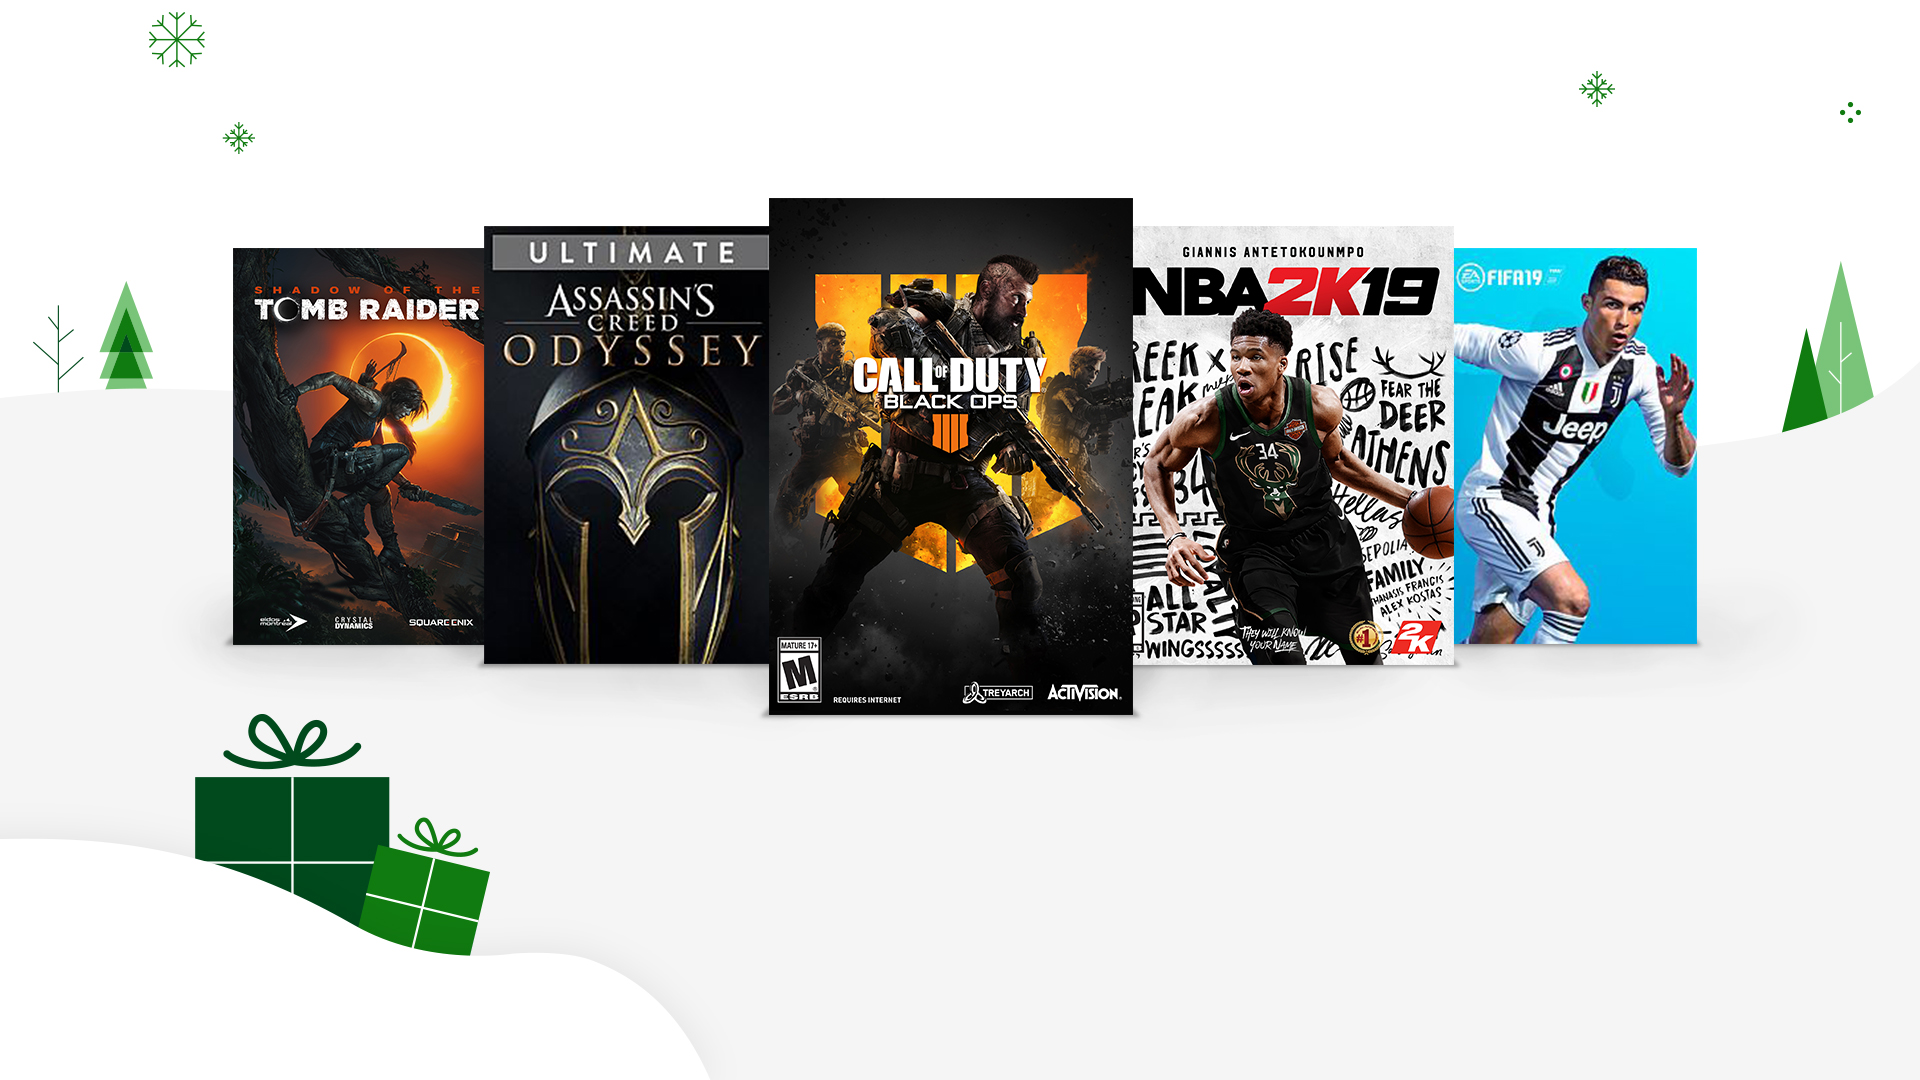 NEWS – Xbox Live Black Friday 2018 deals – full list here (tons of games on sale)